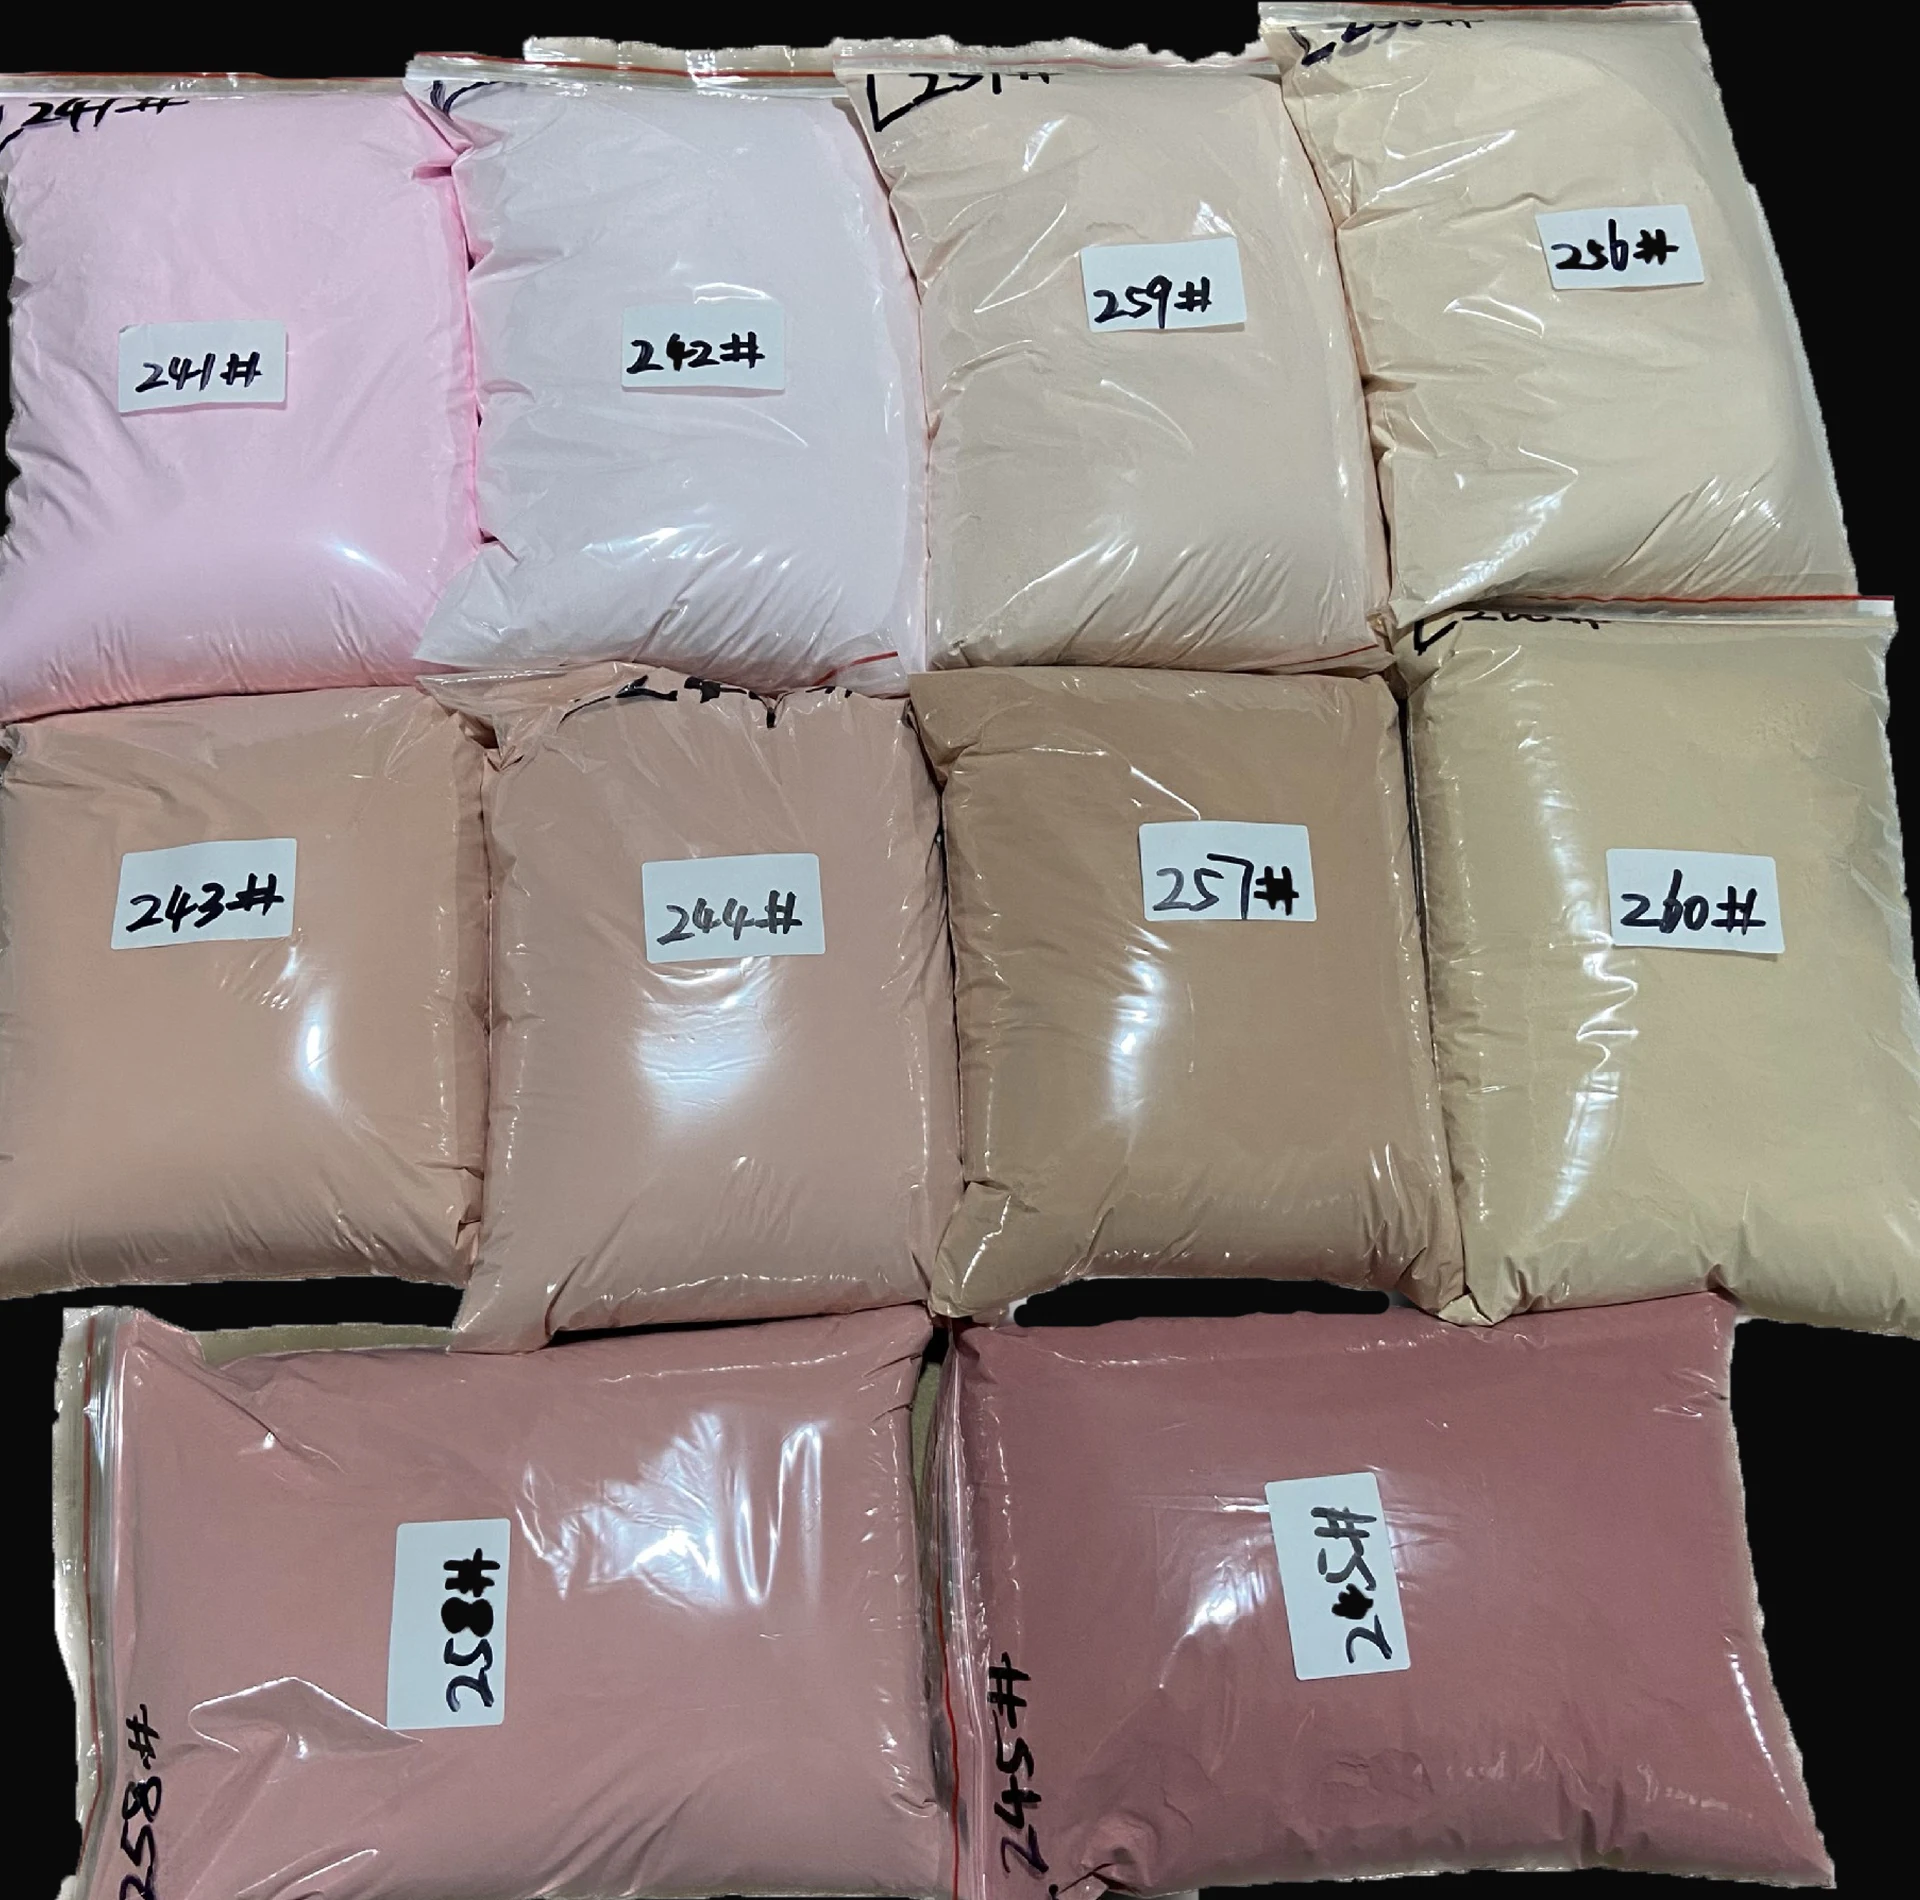 Net100g Nude *Pink Acrylic Powder* 3IN1 Extension/Dipping/Engraving Polymer Builder Powder Fine Profession Nude Crystal Powder